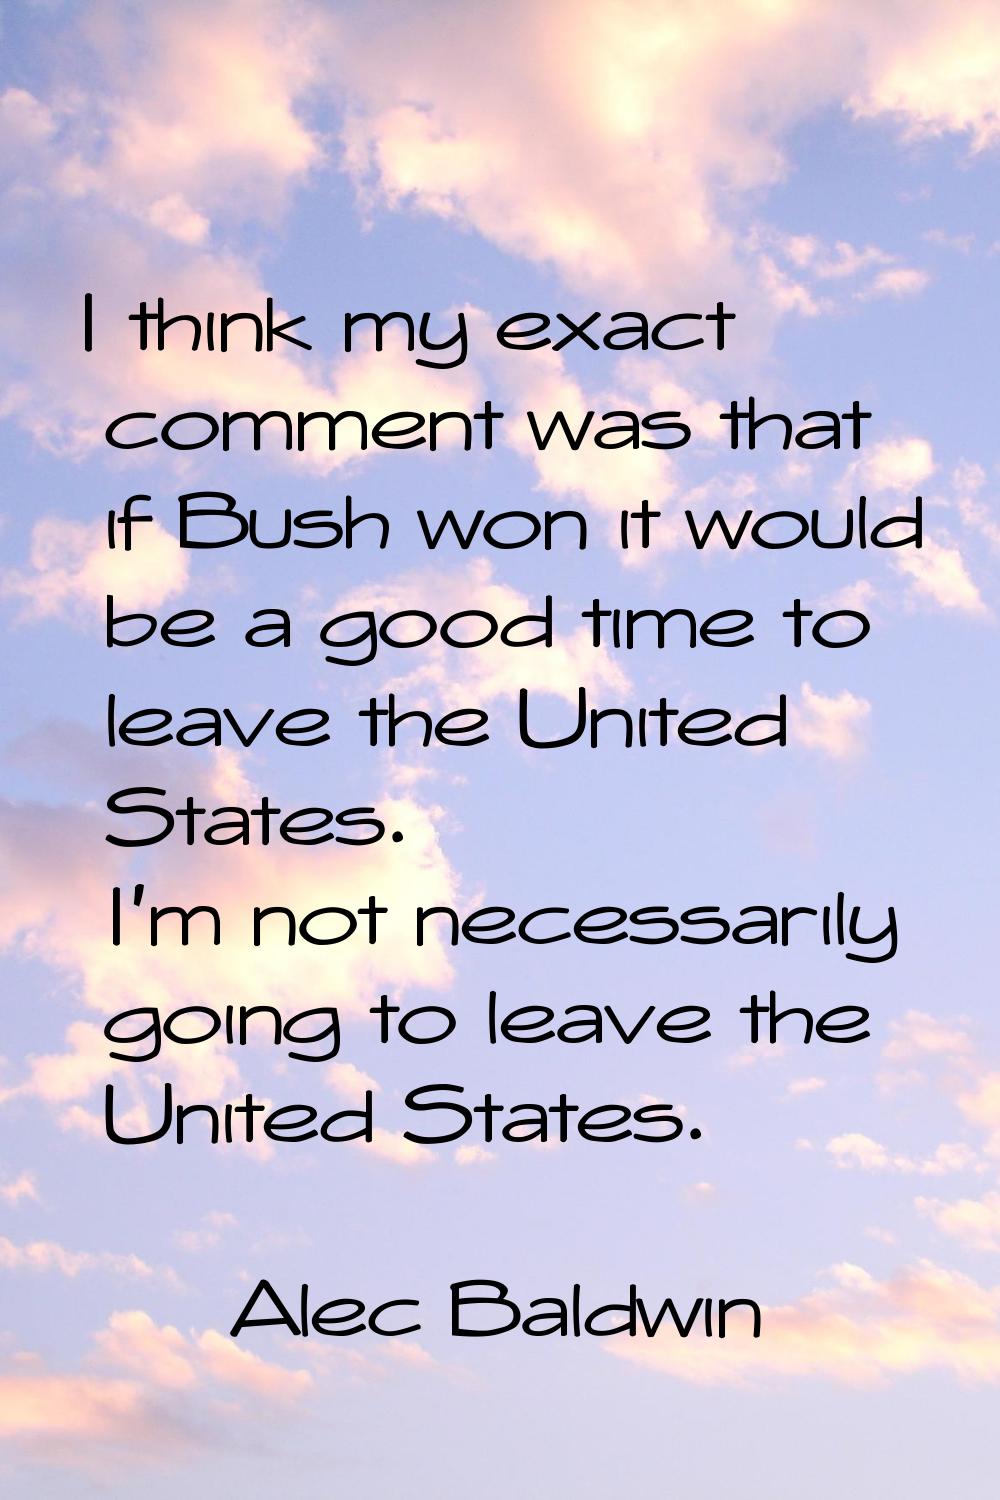 I think my exact comment was that if Bush won it would be a good time to leave the United States. I